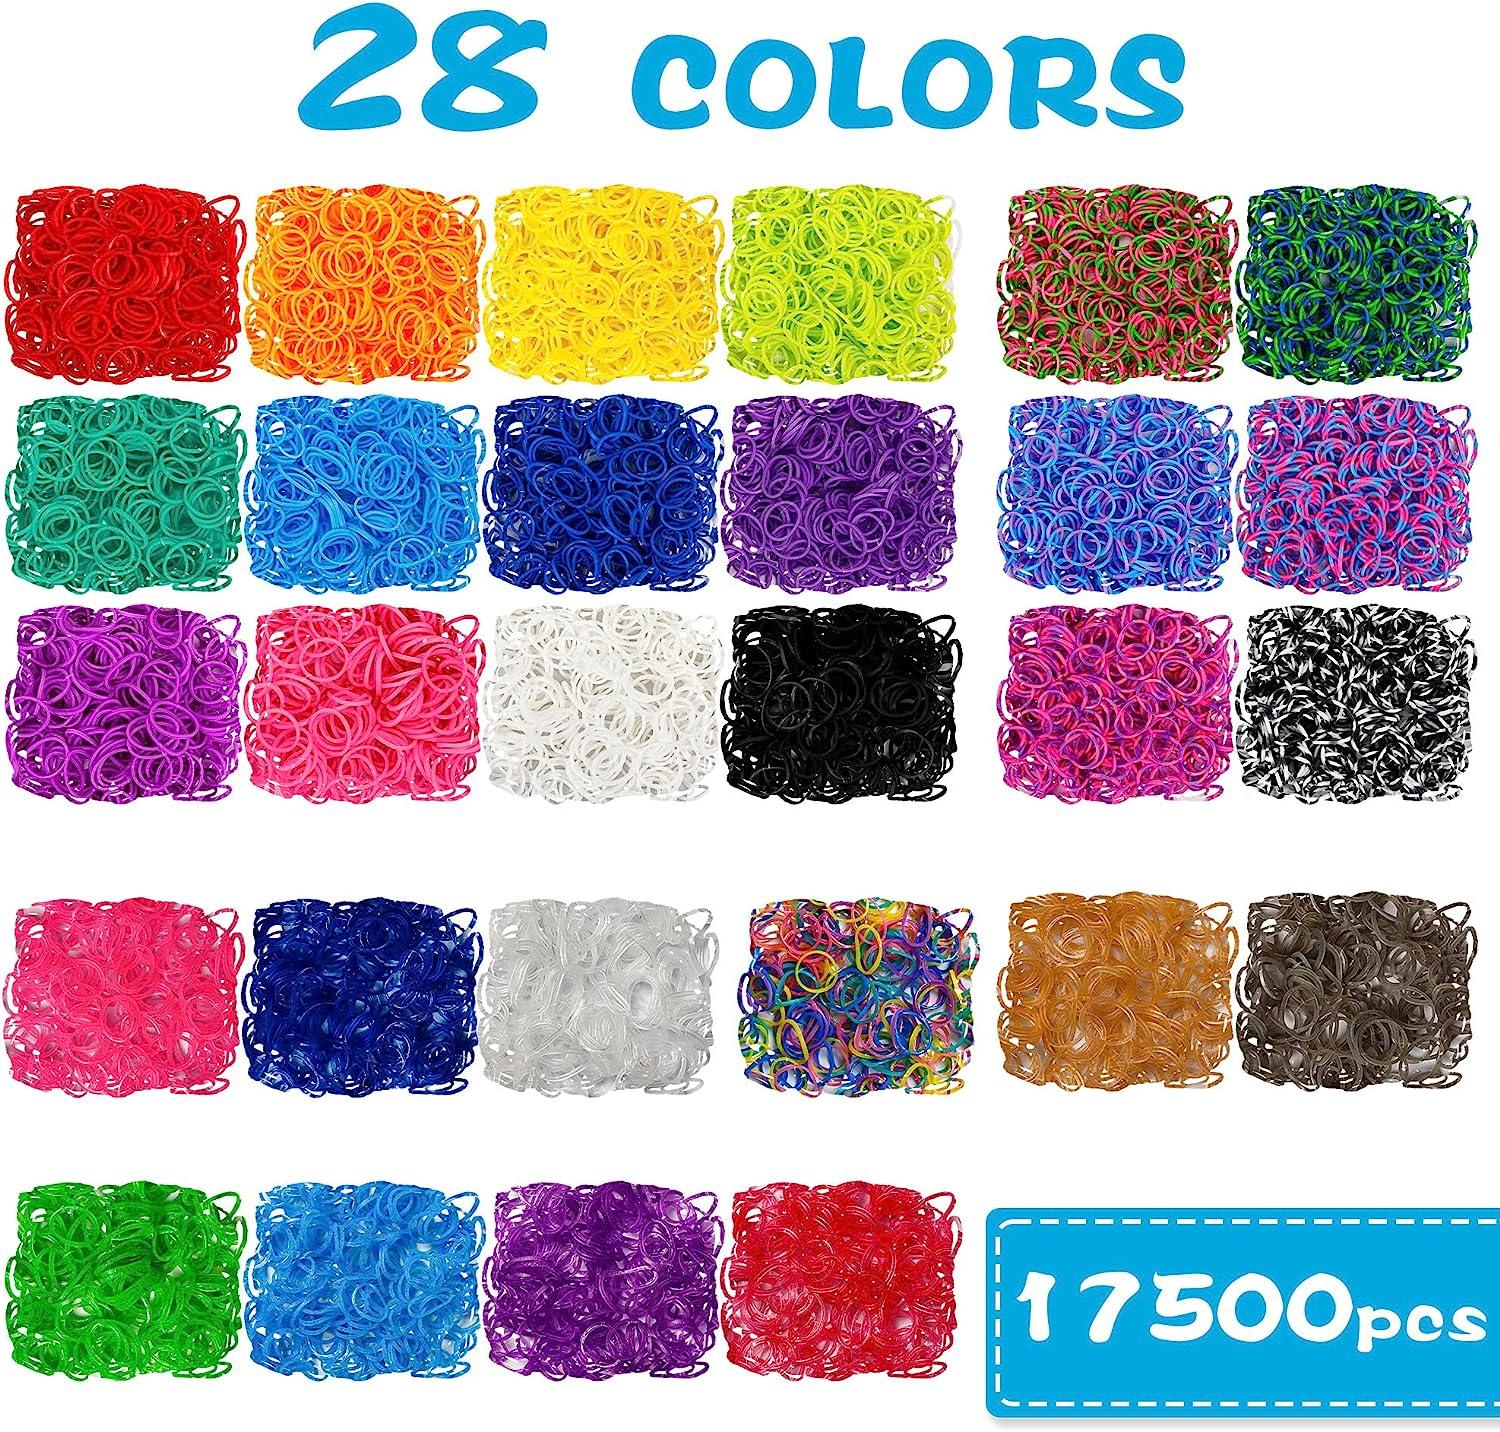 Inscraft 17500+ Rubber Loom Bands with 3 Layer Blue Container, 28 Colors, 600 S-Clips, 352 Beads, 40 Cartoon Pendant, Bracelet Making Refill Kit for